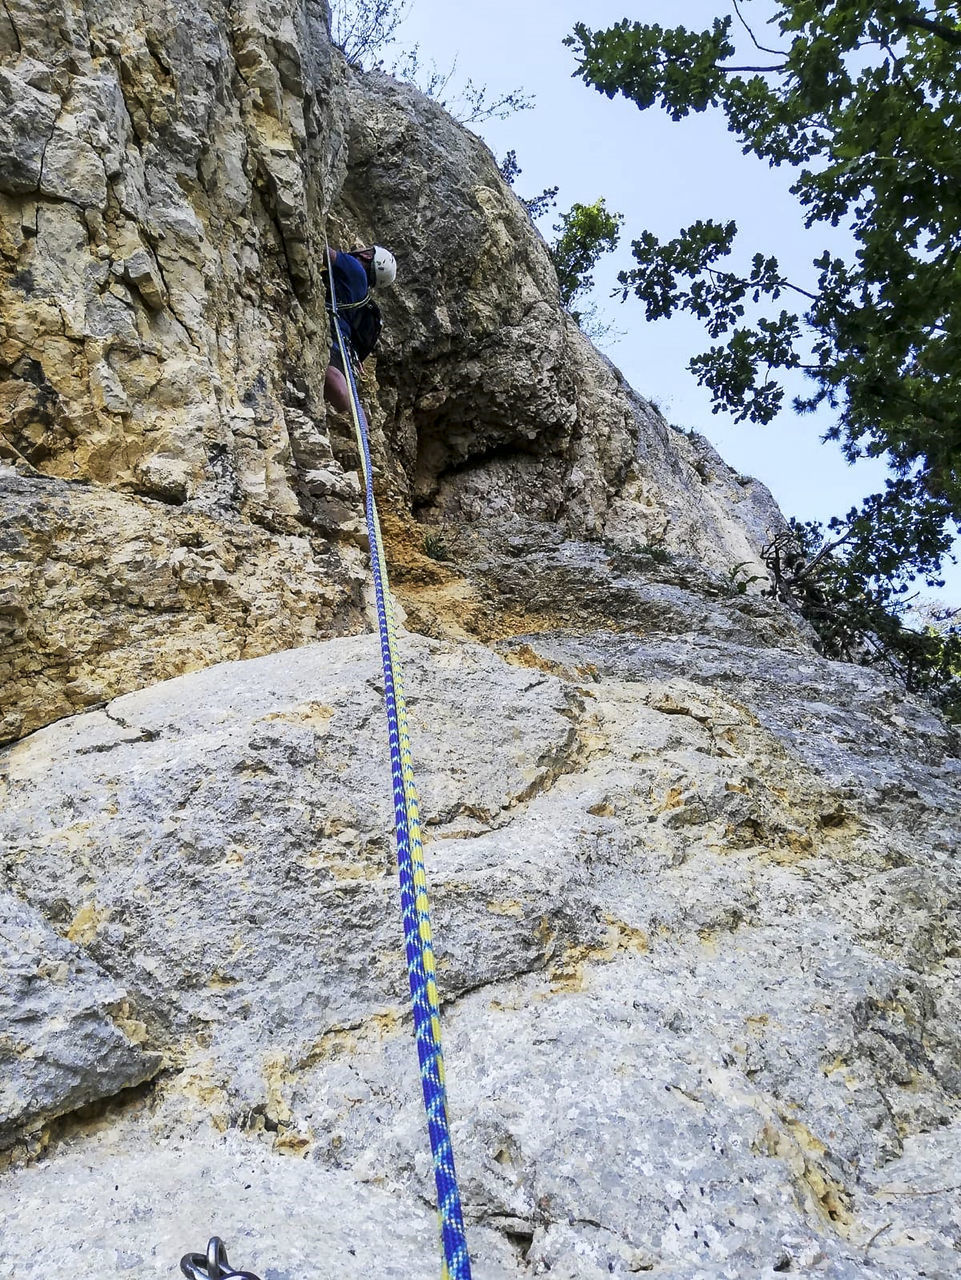 LOW ANGLE VIEW OF ROPE ON ROCK